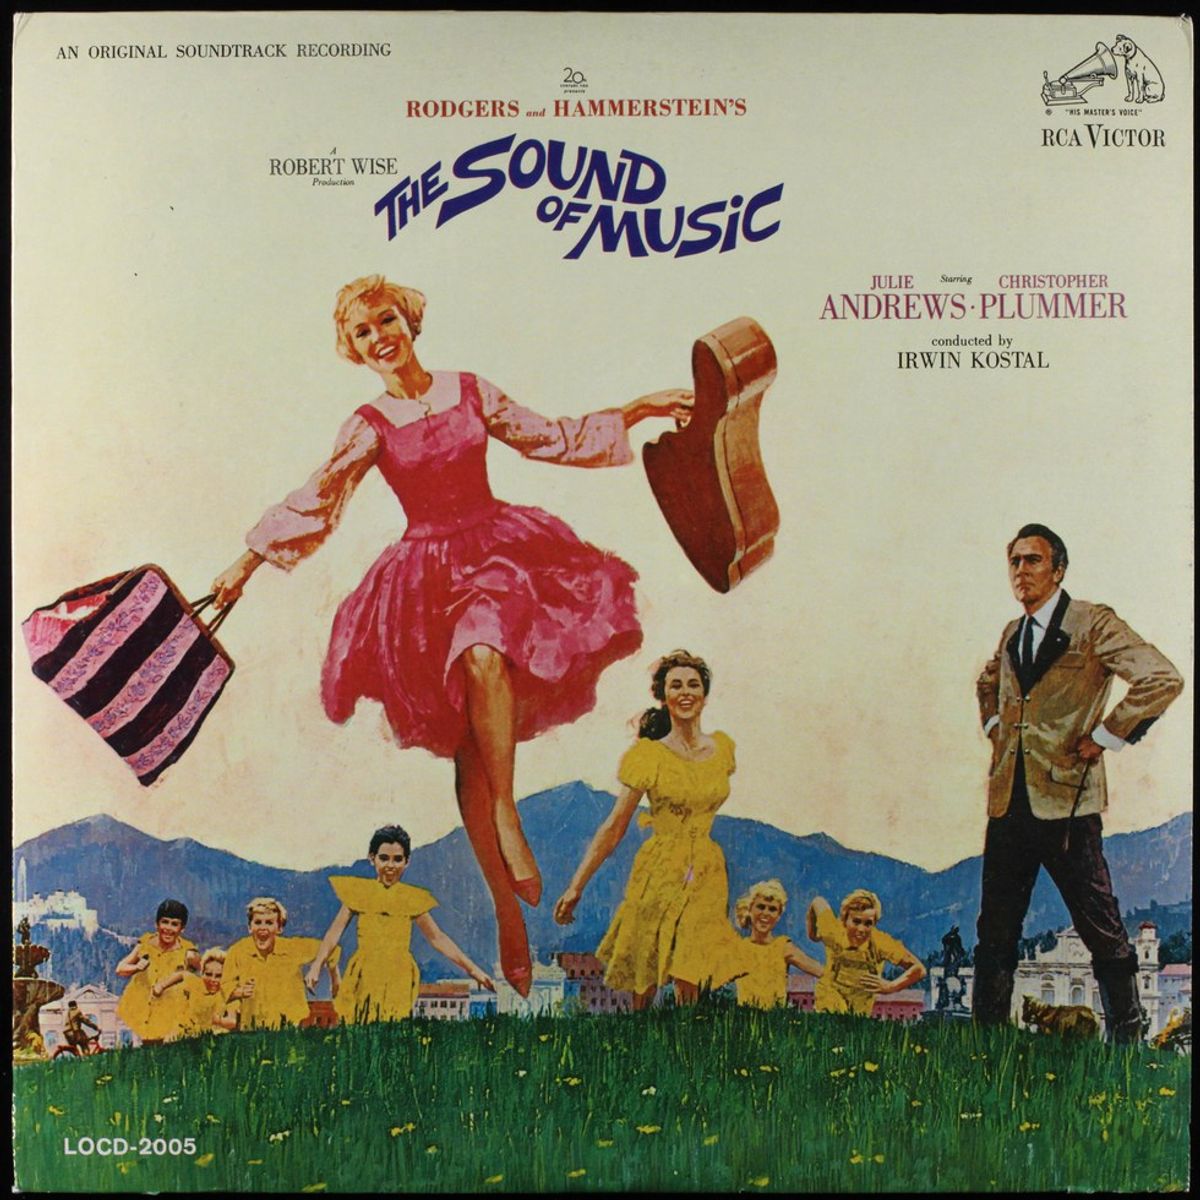 6 Reasons To Re-Watch The Sound Of Music In 2016